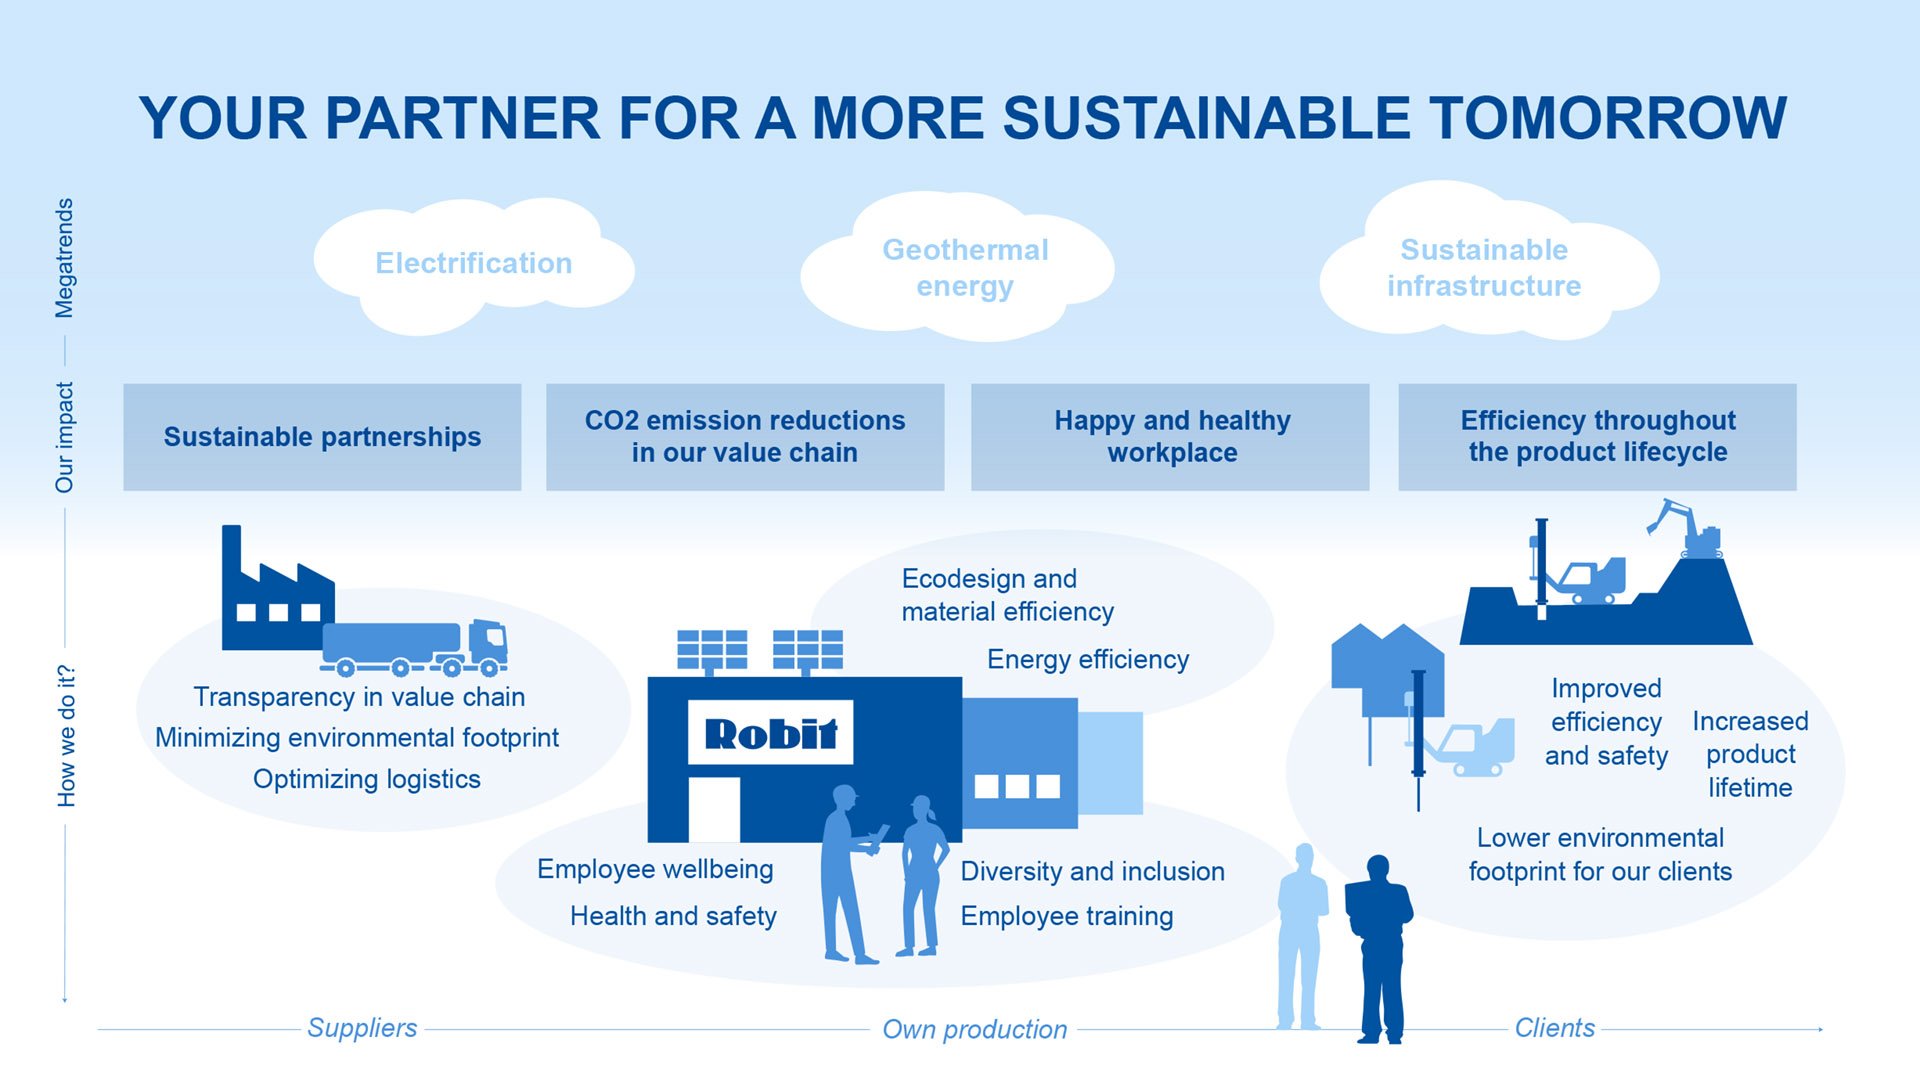 Your partner for a more sustainable tomorrow